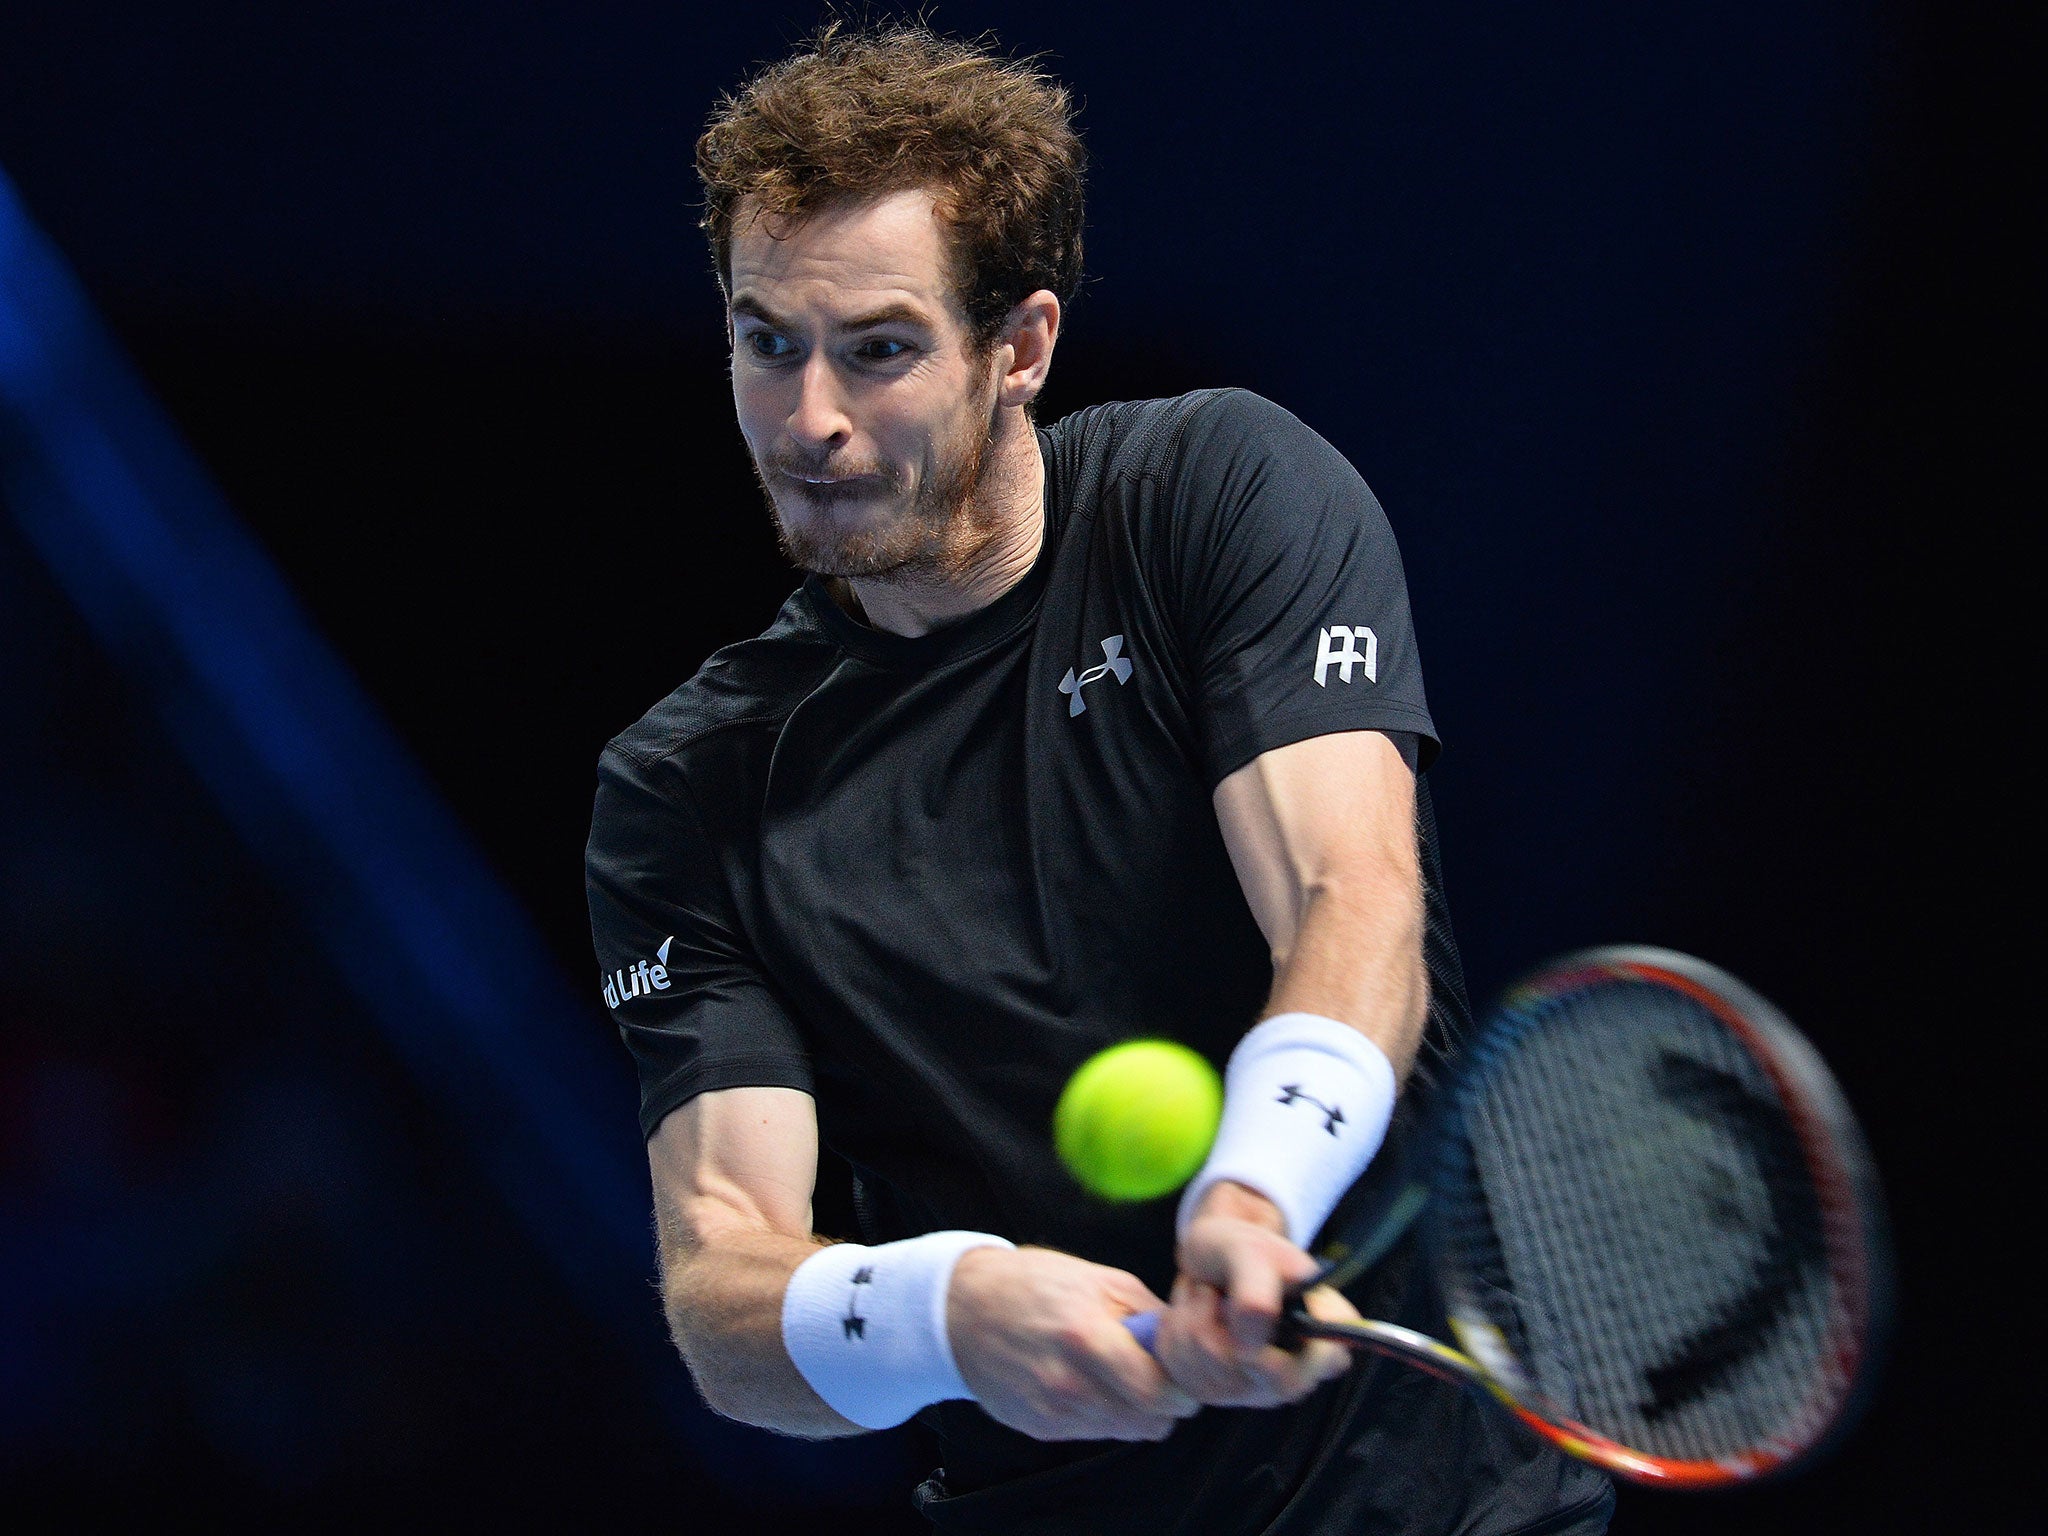 Andy Murray on his way to a 6-4, 6-4 victory over David Ferrer